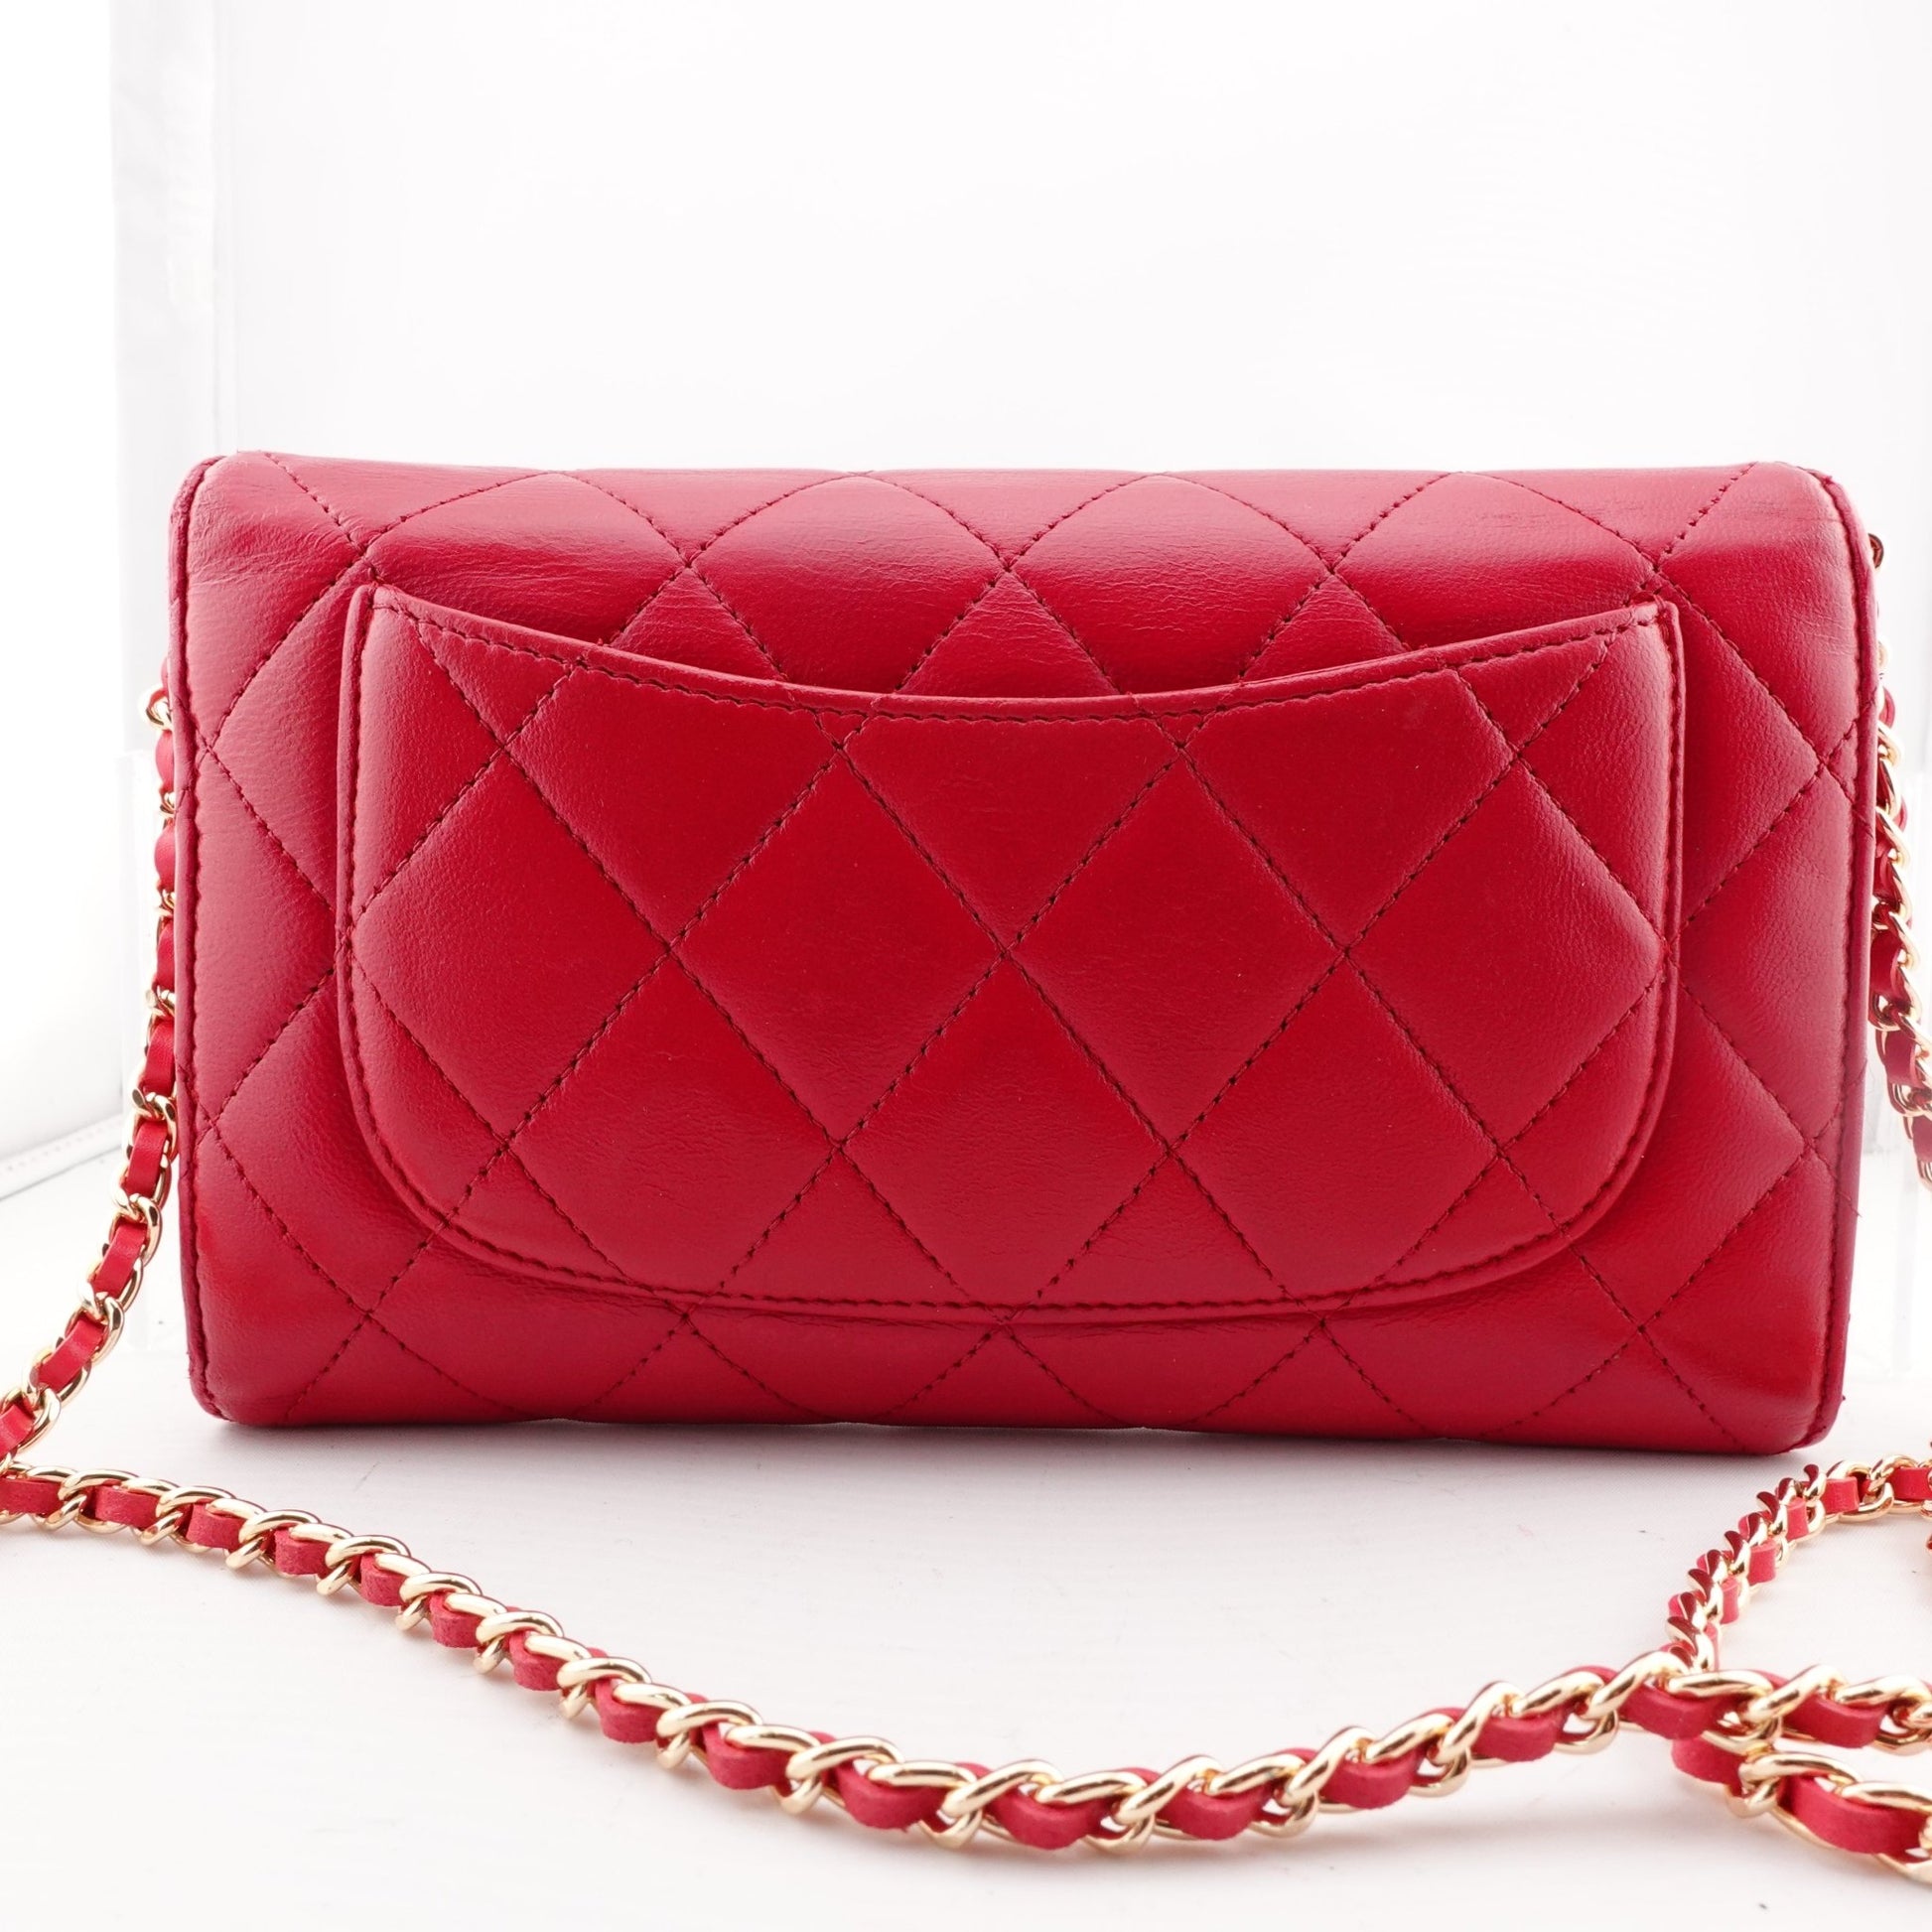 CHANEL Lambskin Classic Flap Wallet With Chain - Bag Envy